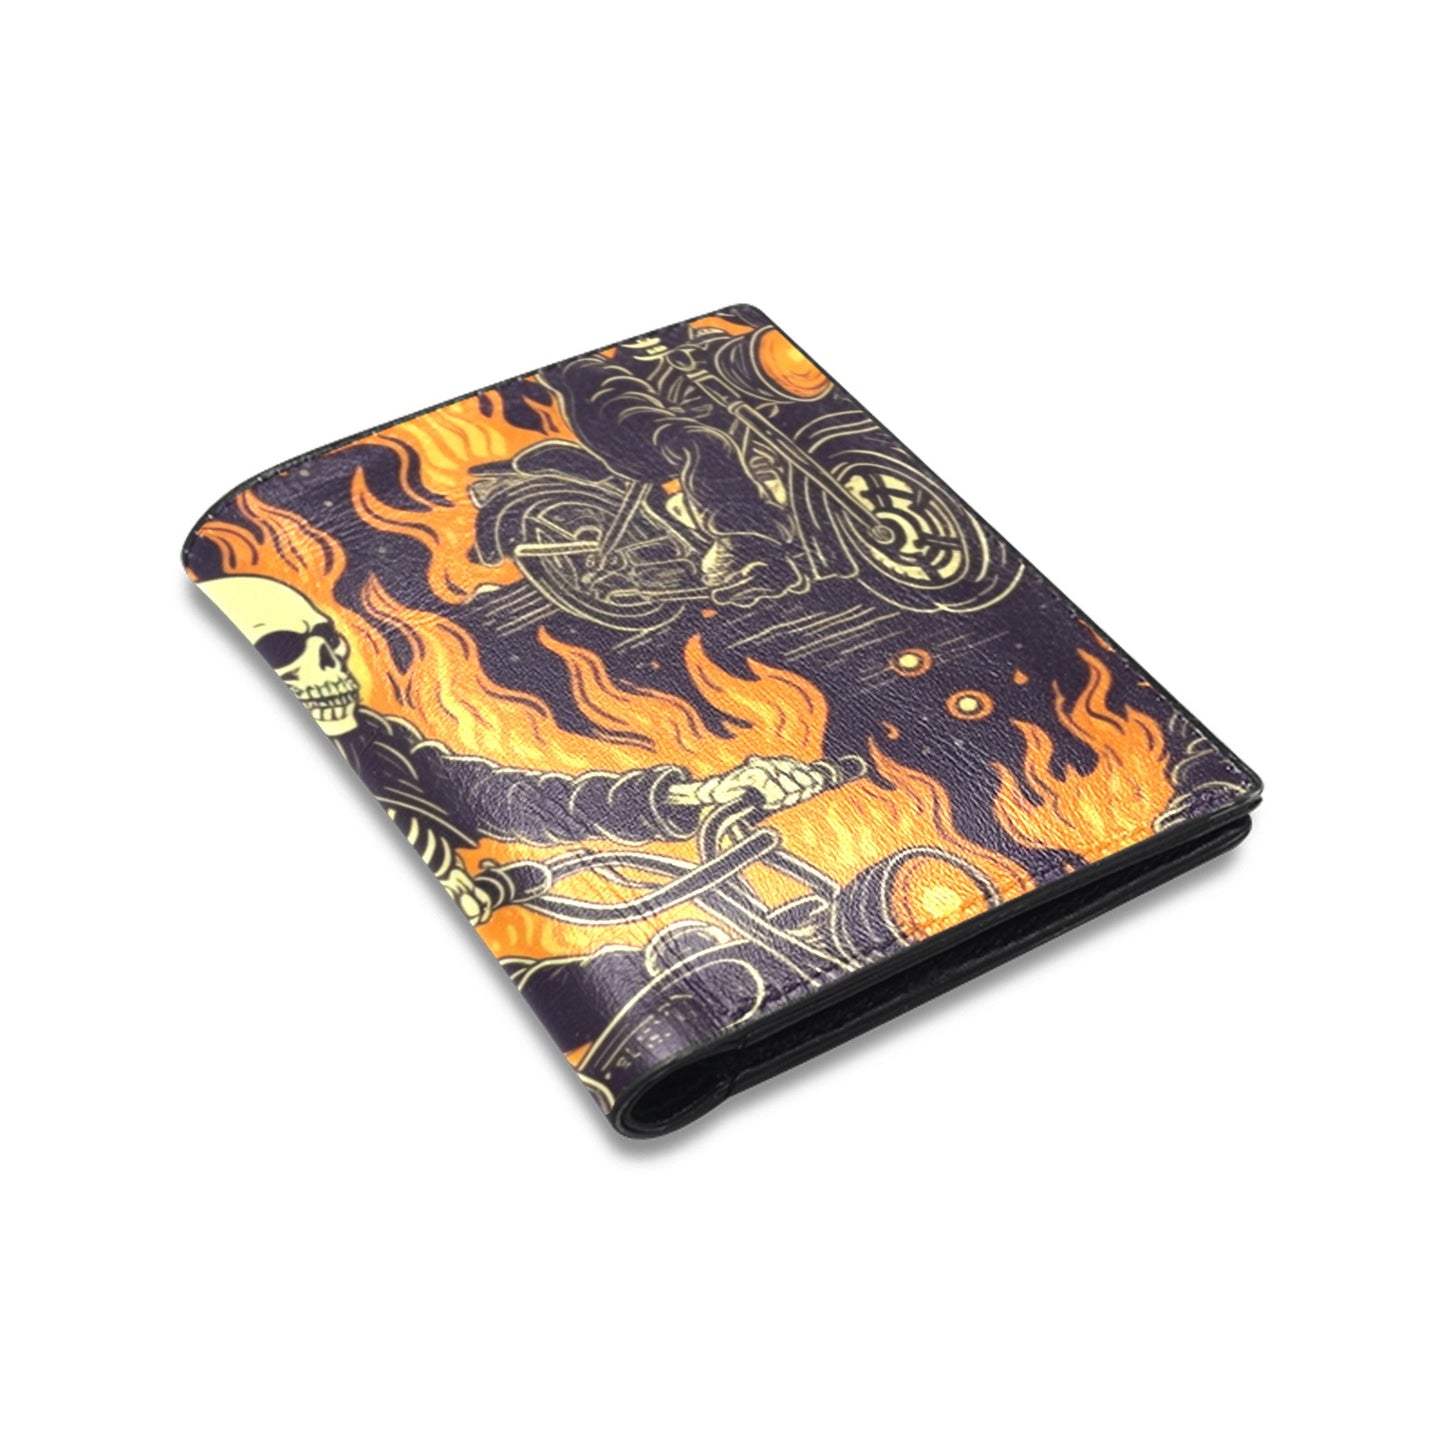 Hell Rider Skeleton Leather Wallet